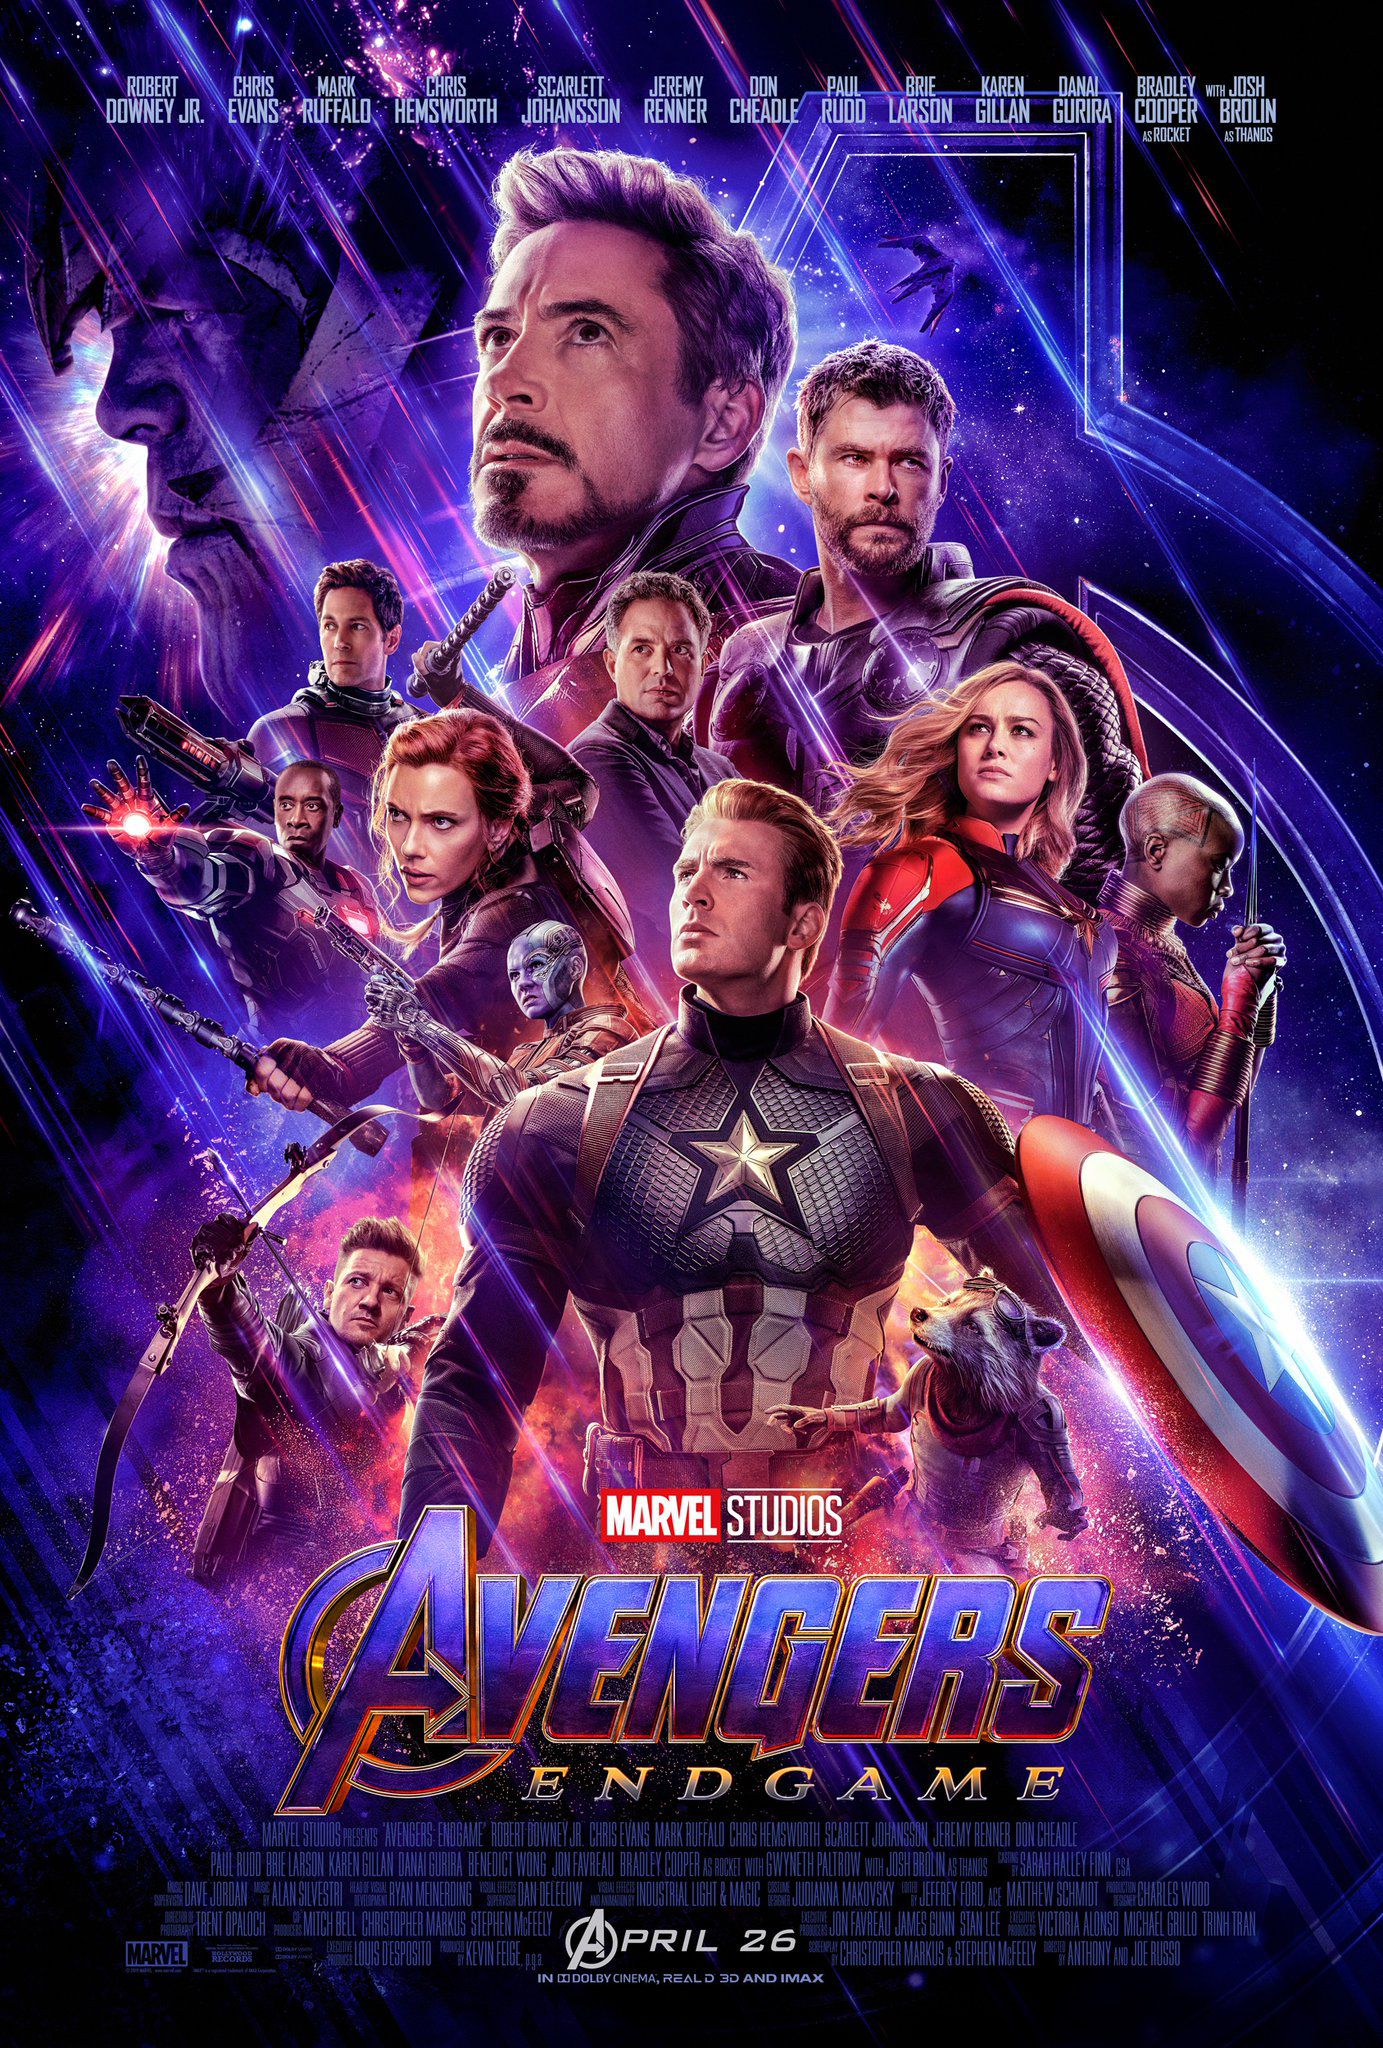 Avengers Endgame Poster Controversy Marvel Changed The